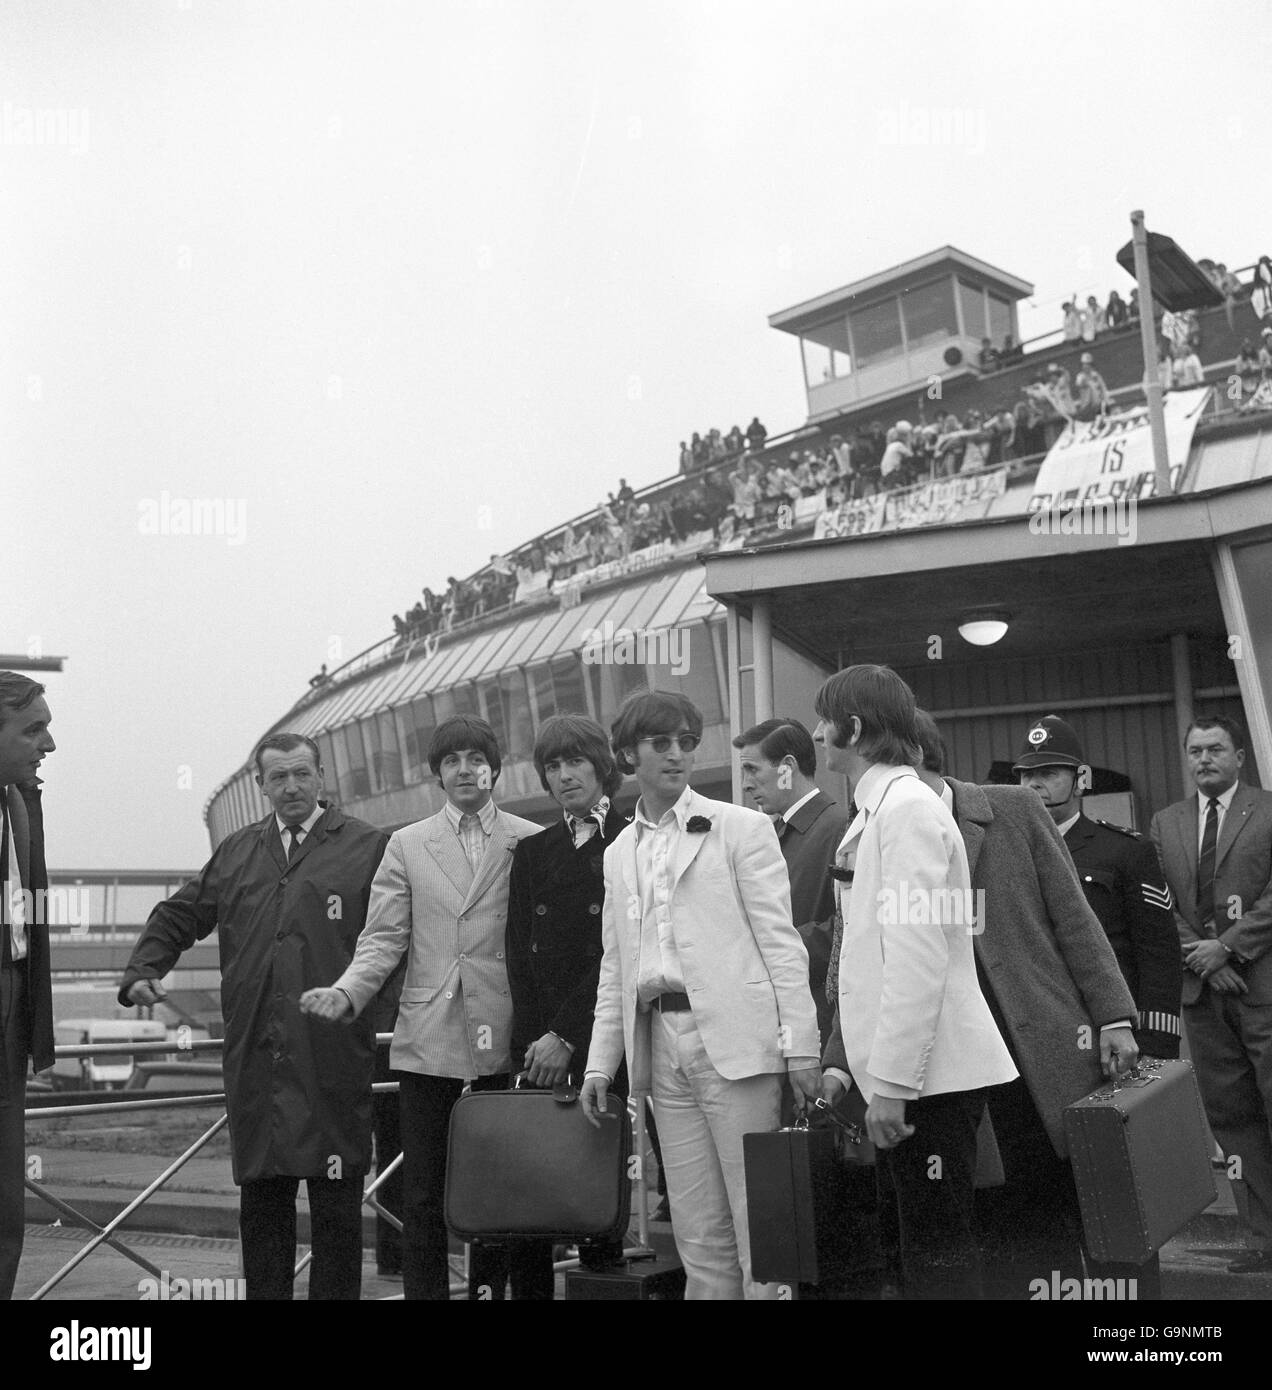 Two hundred and fifty screaming fans wlecomed the Beatles from the balcony of the Queen's Building at London Airport when they arrived back from their American tour. Left to right: Paul McCartney, George Harrison, John Lennon and Ringo Starr. Stock Photo